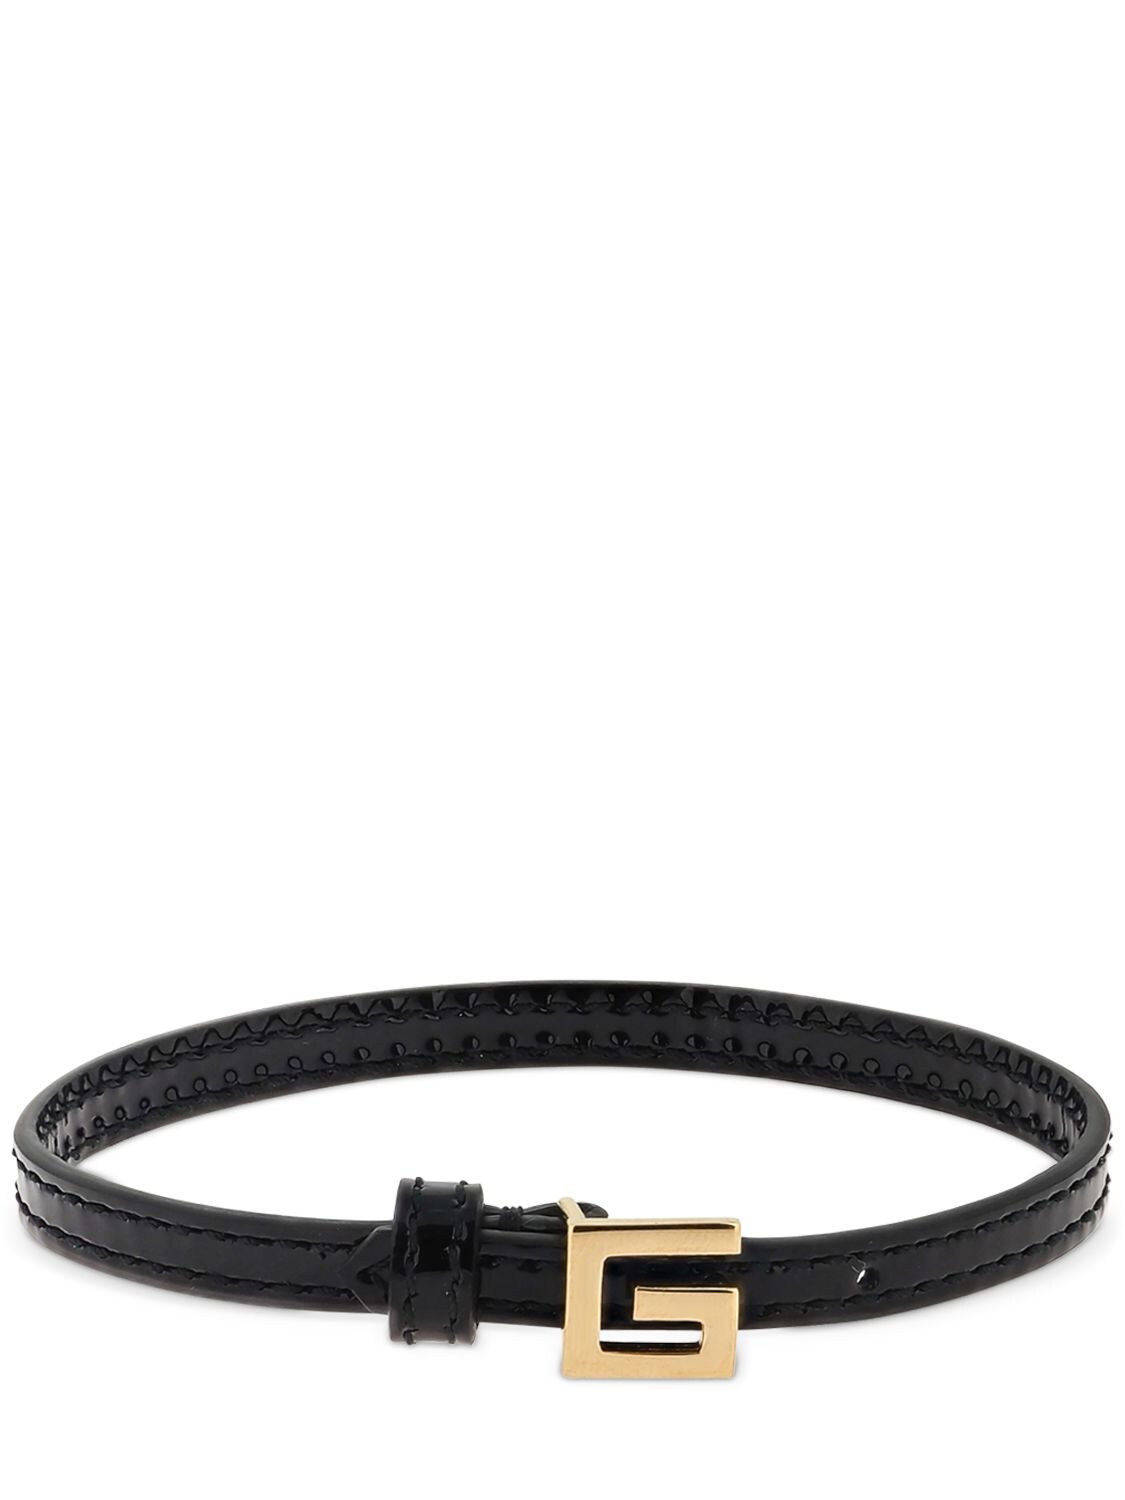 Gucci Leather Bracelet W/ Square G Detail In Black,gold